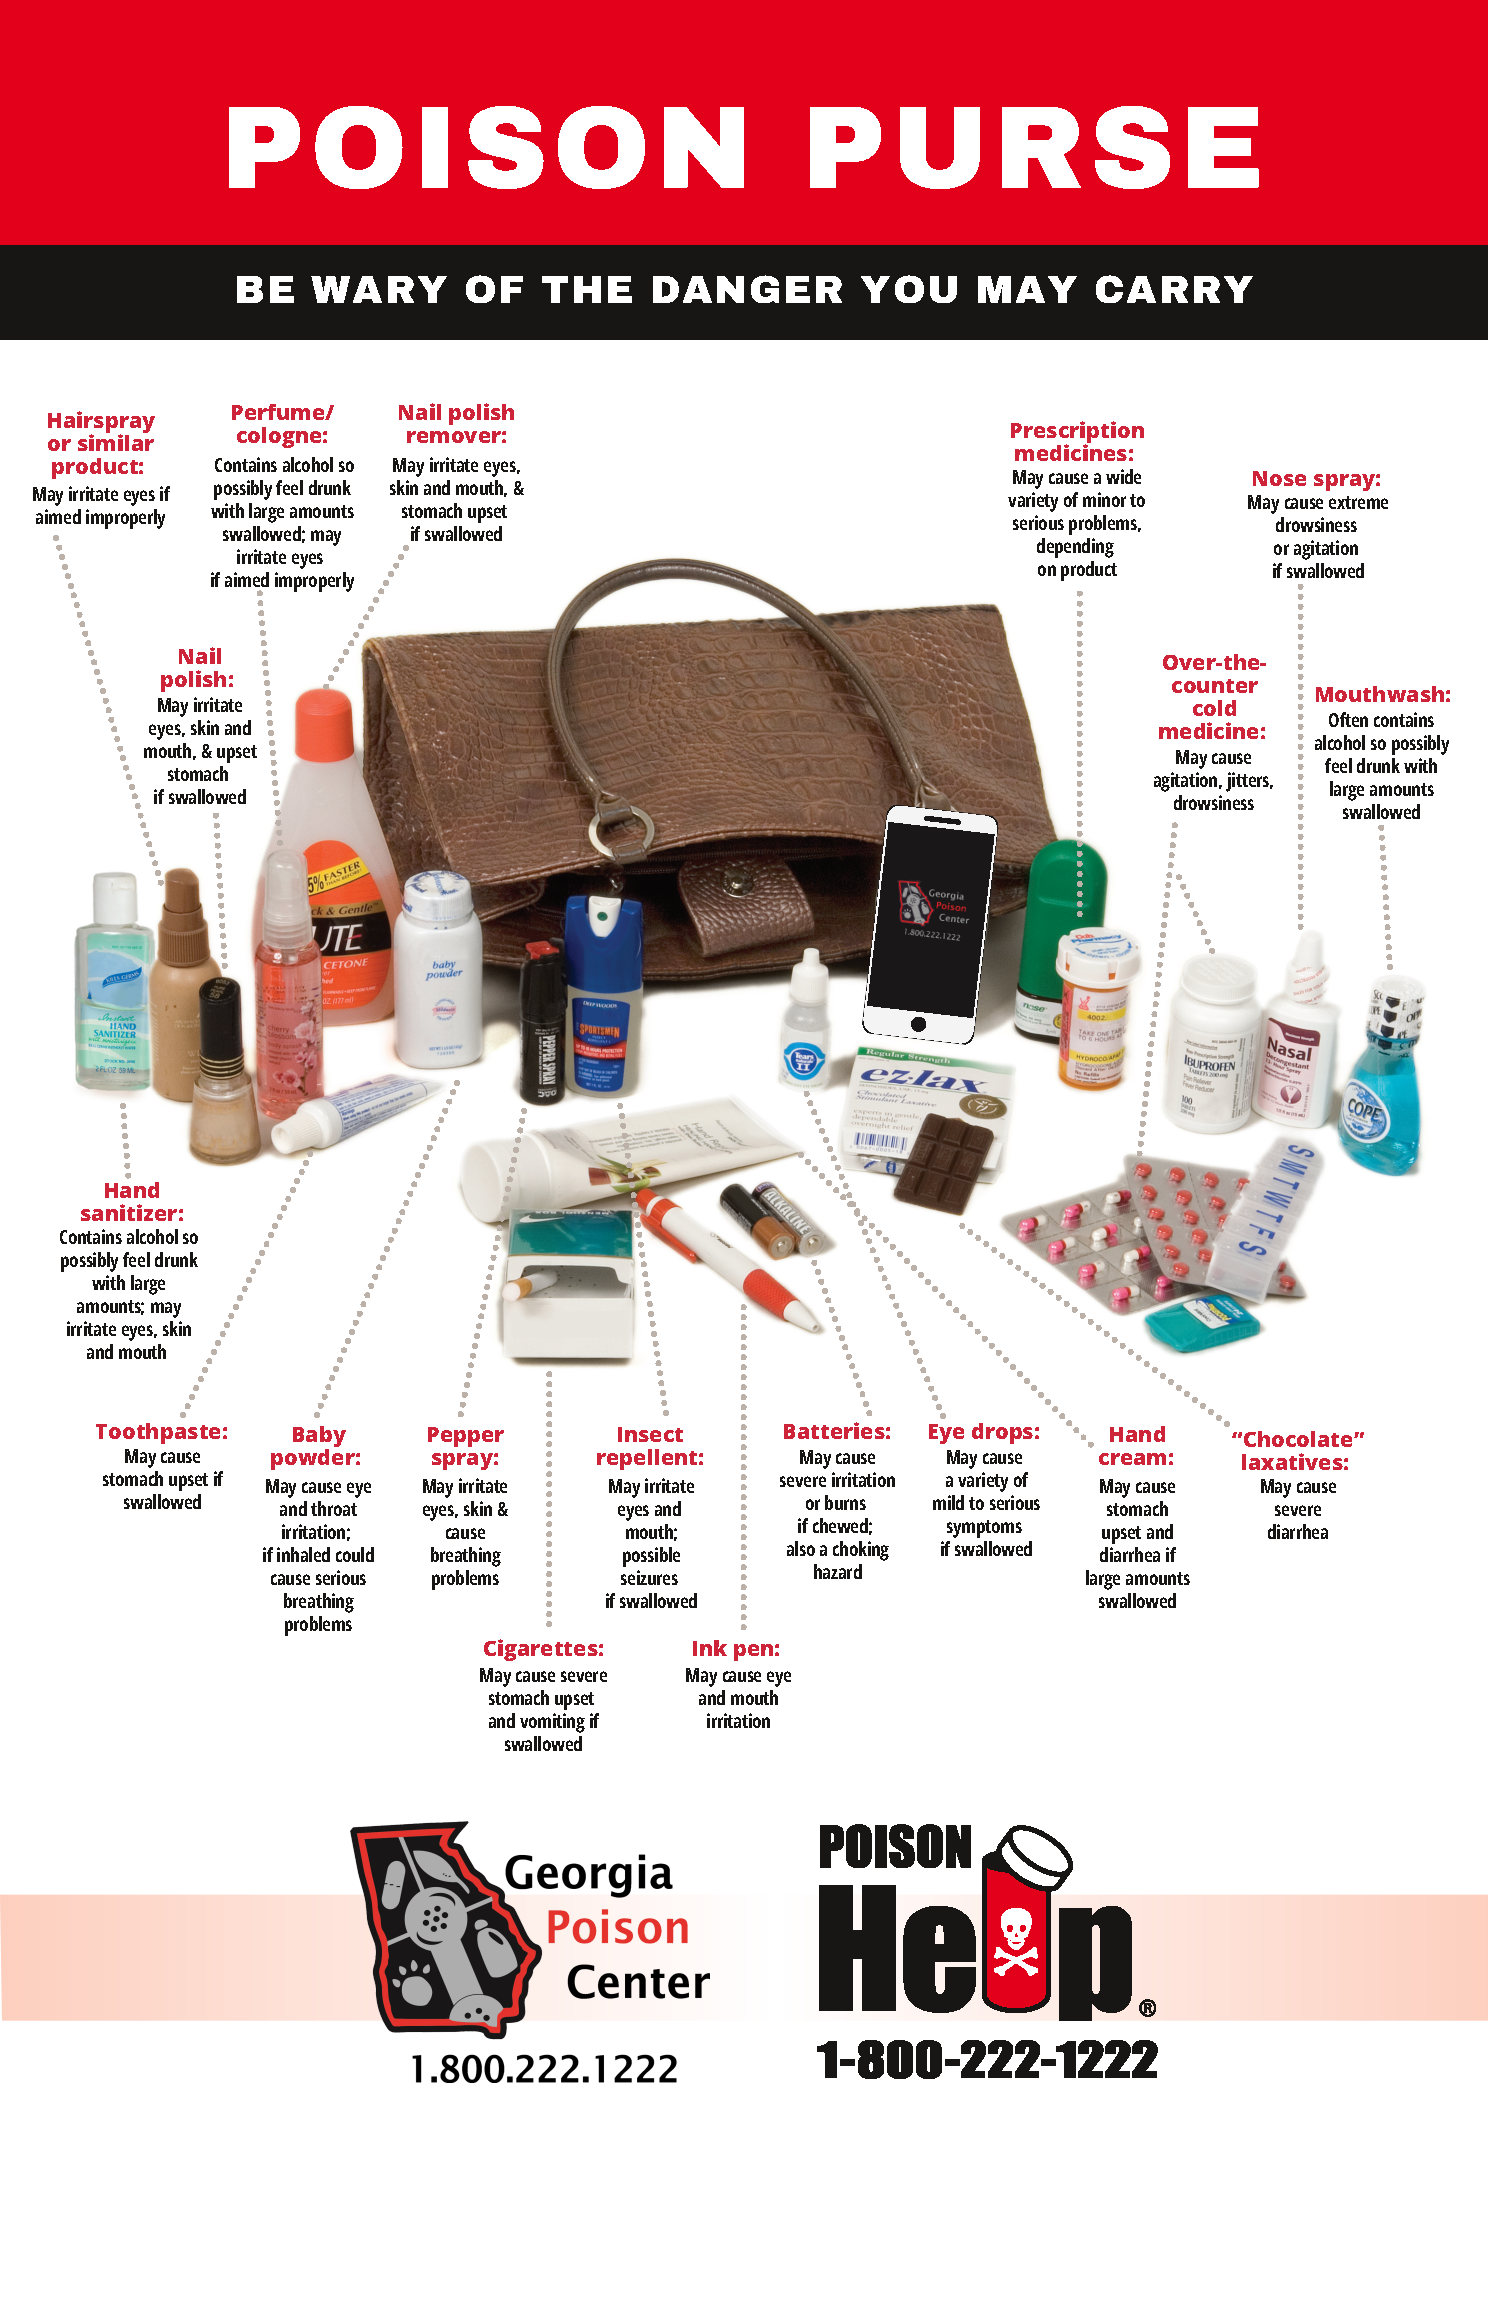 Handbag 101: How to Care for Leather Purses - The Vault